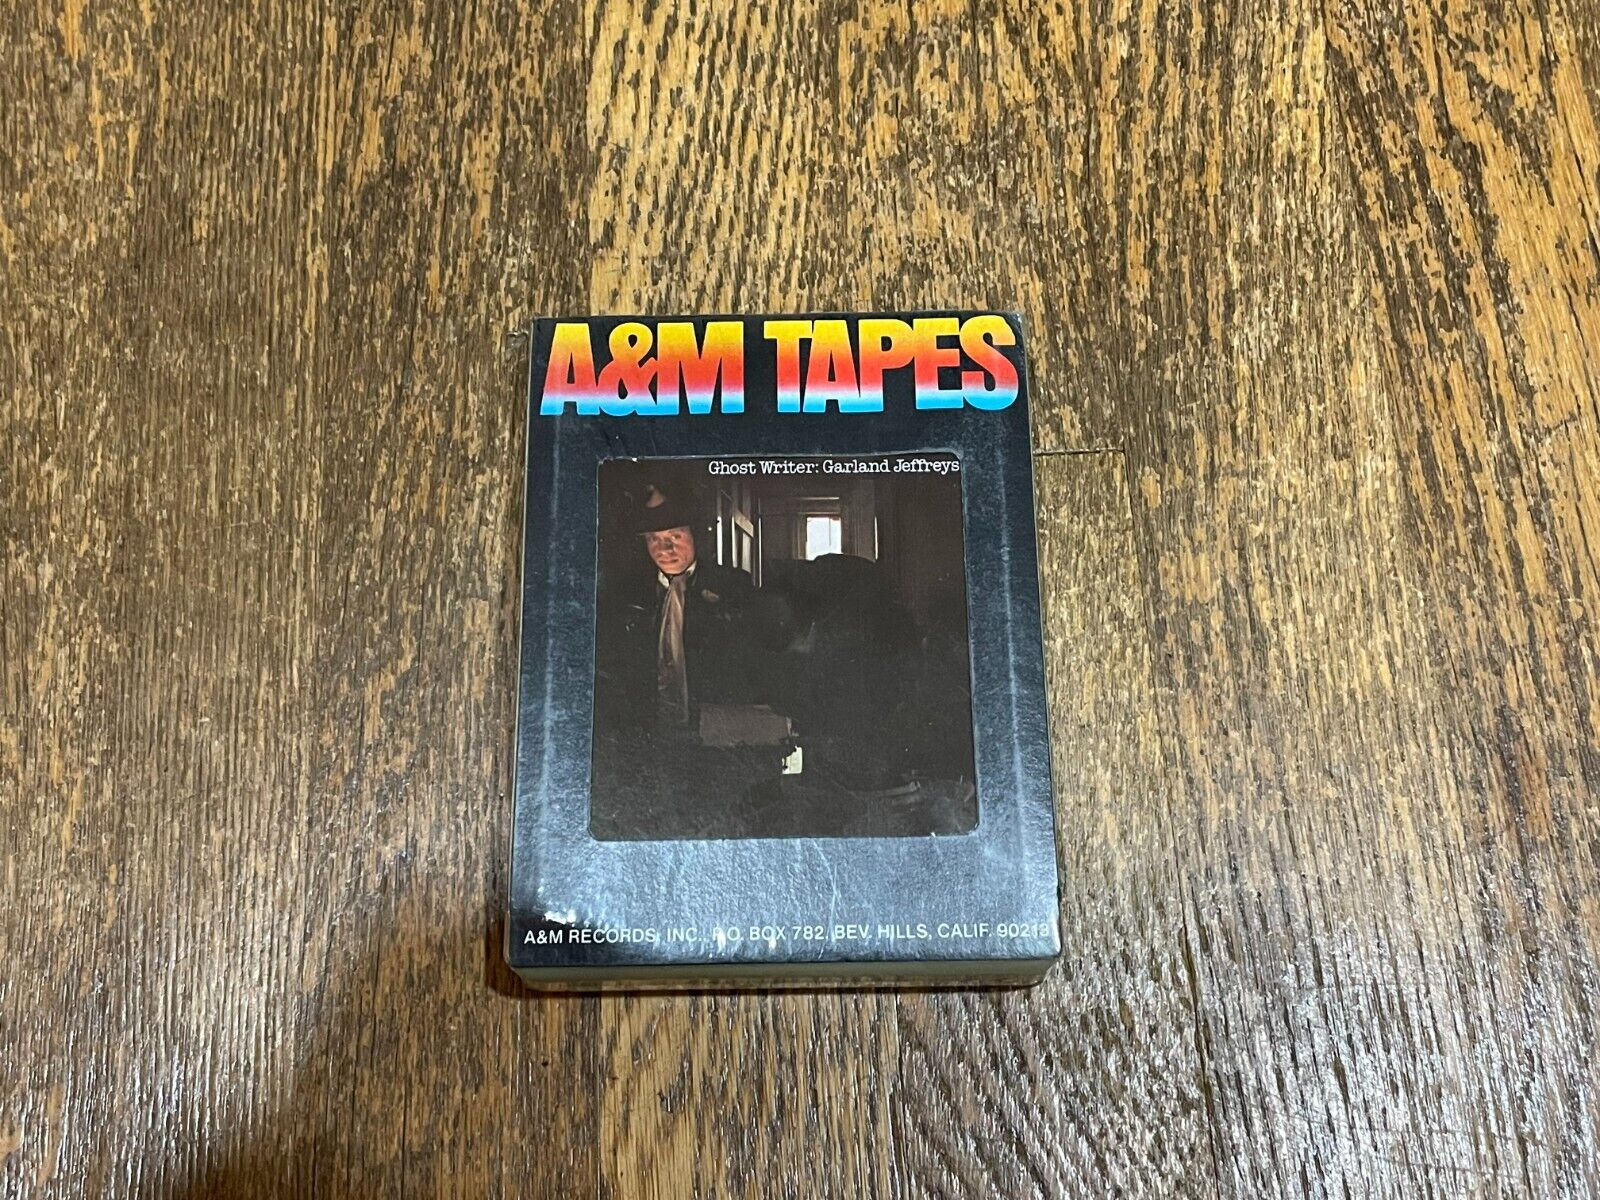 Garland Jeffreys SEALED 8 Track Tape - Ghost Writer - A&M Records 